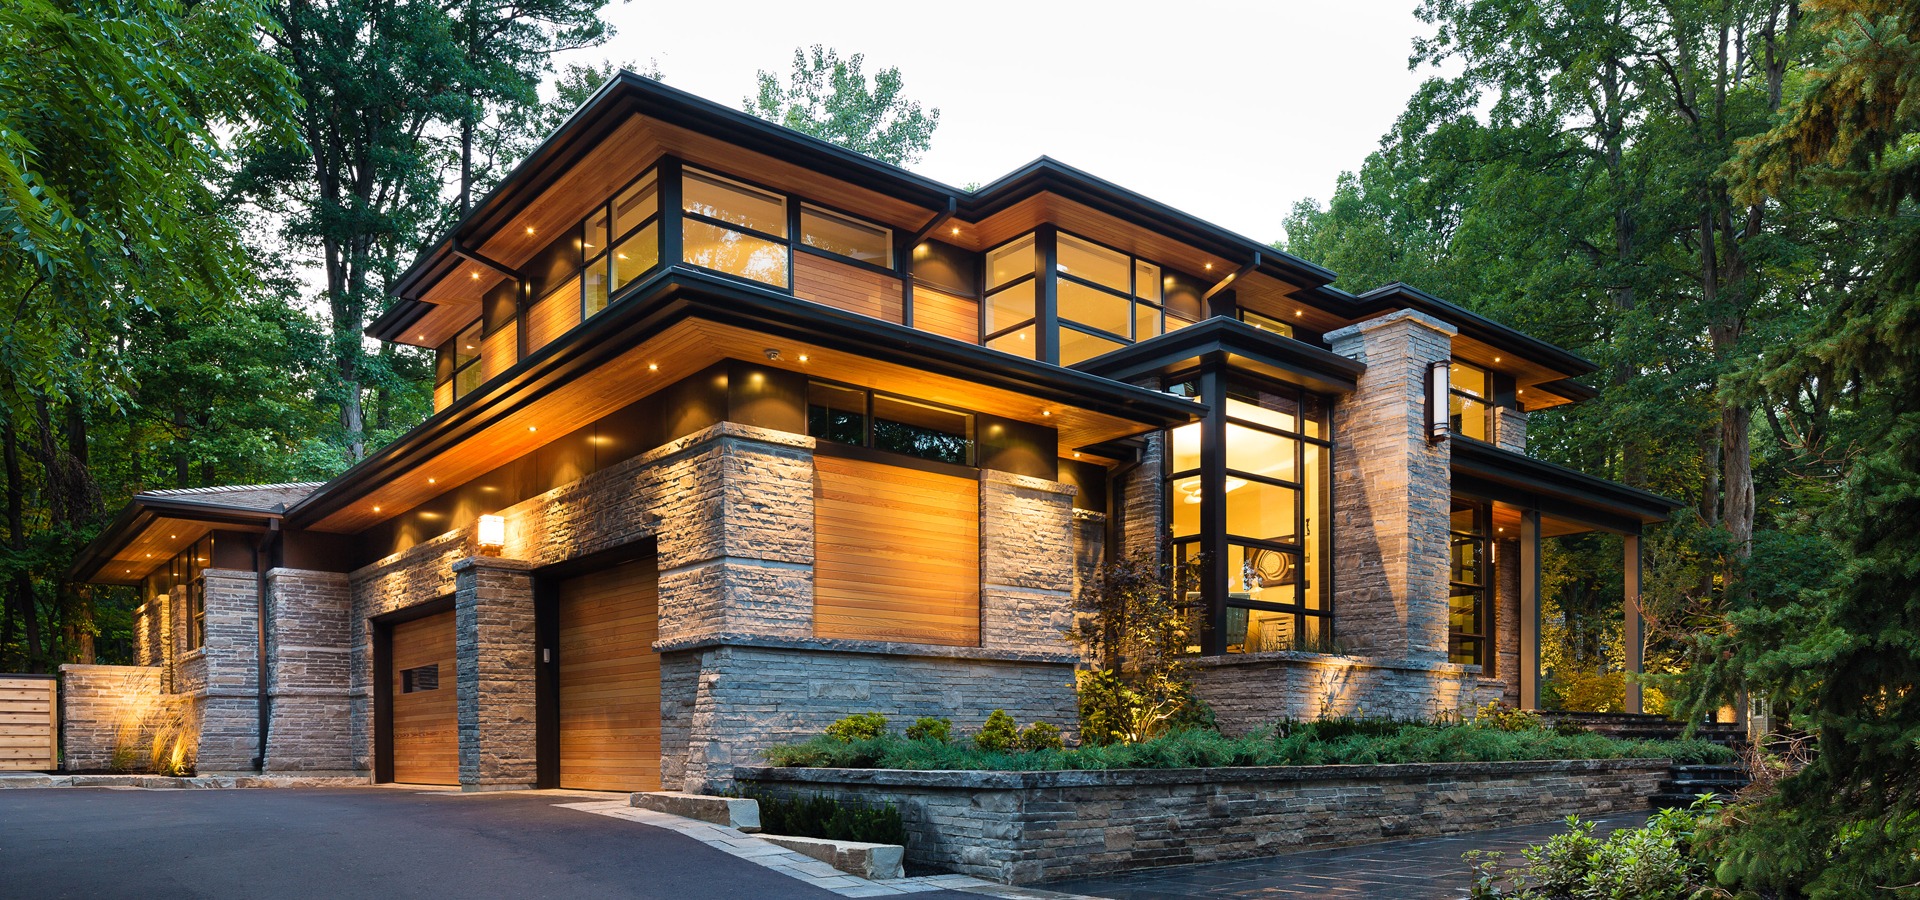 Natural modern house with wood siding, black frame windows and angled walls.